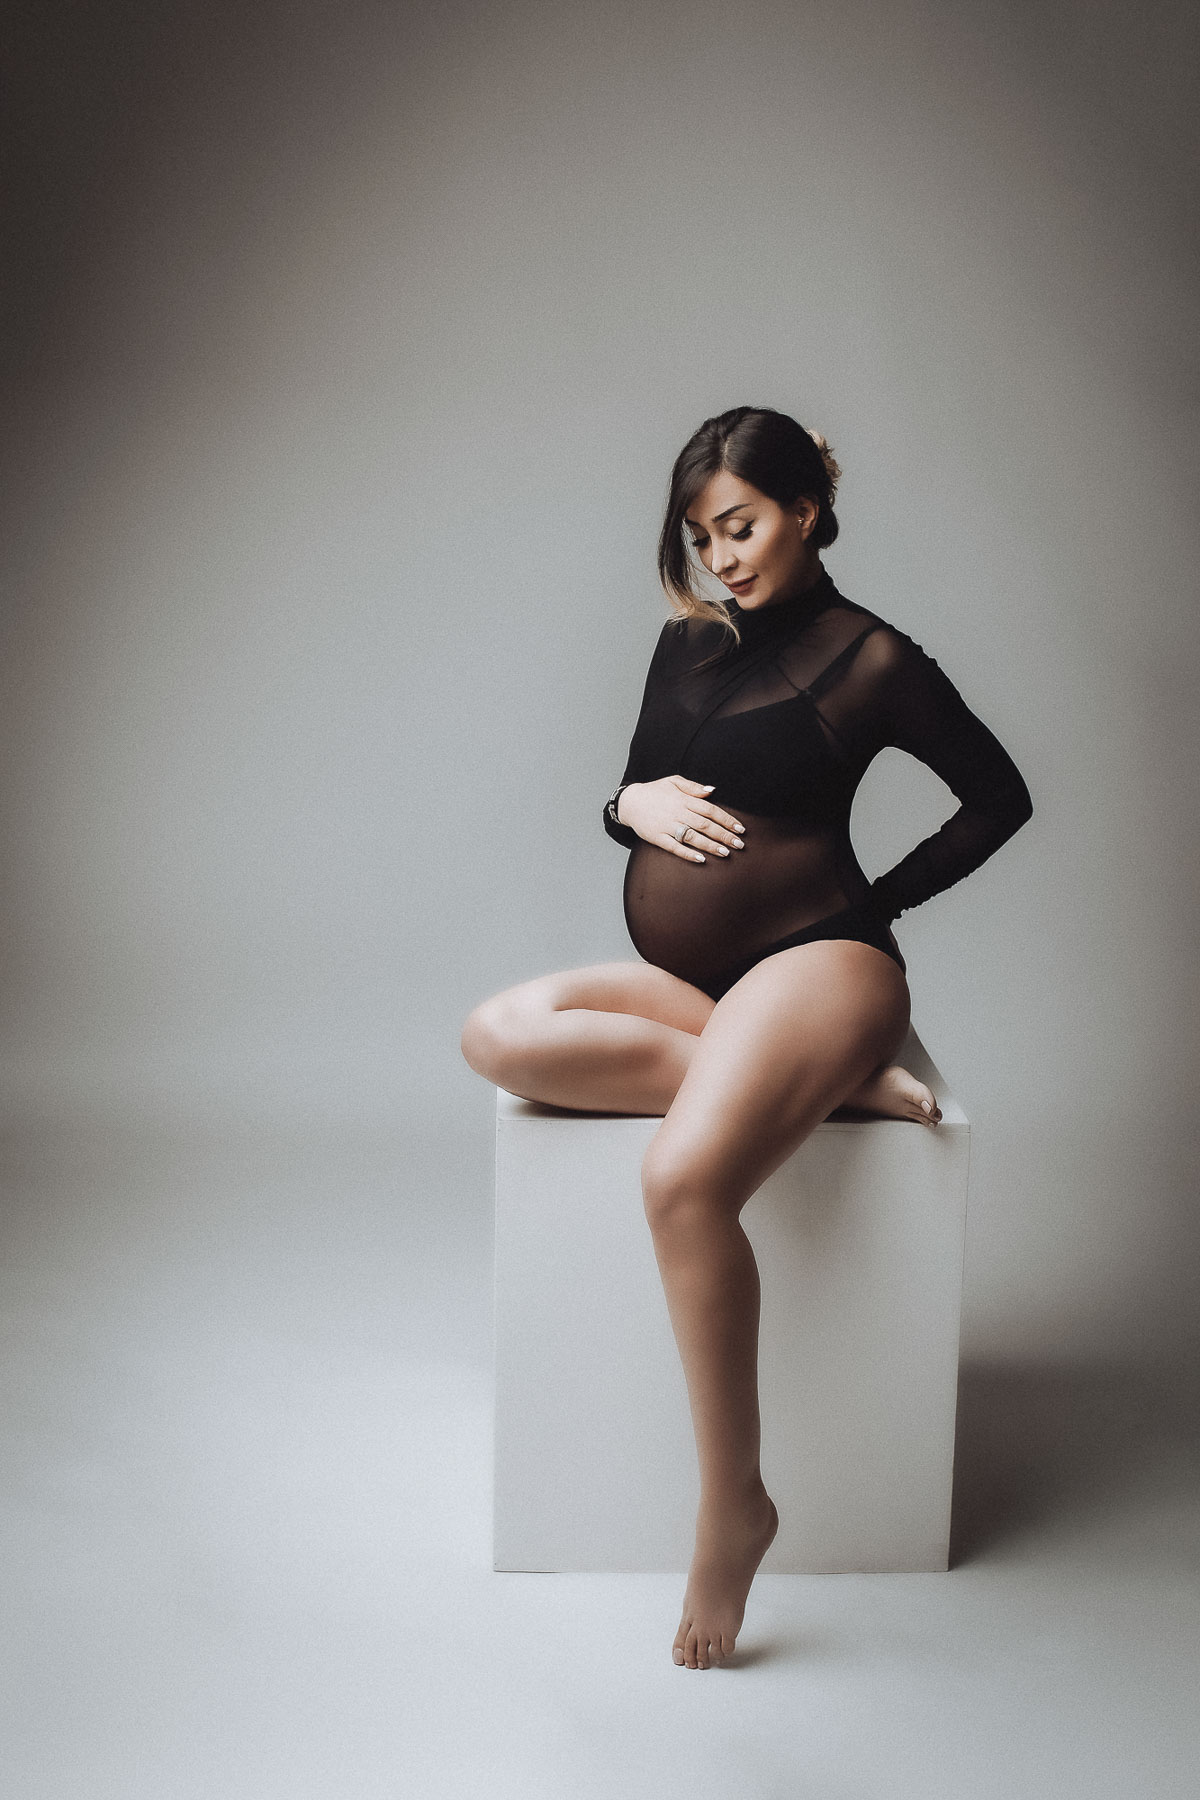 Best pregnancy photo in Vancouver with Maternity BODYSUIT for photoshoot in black